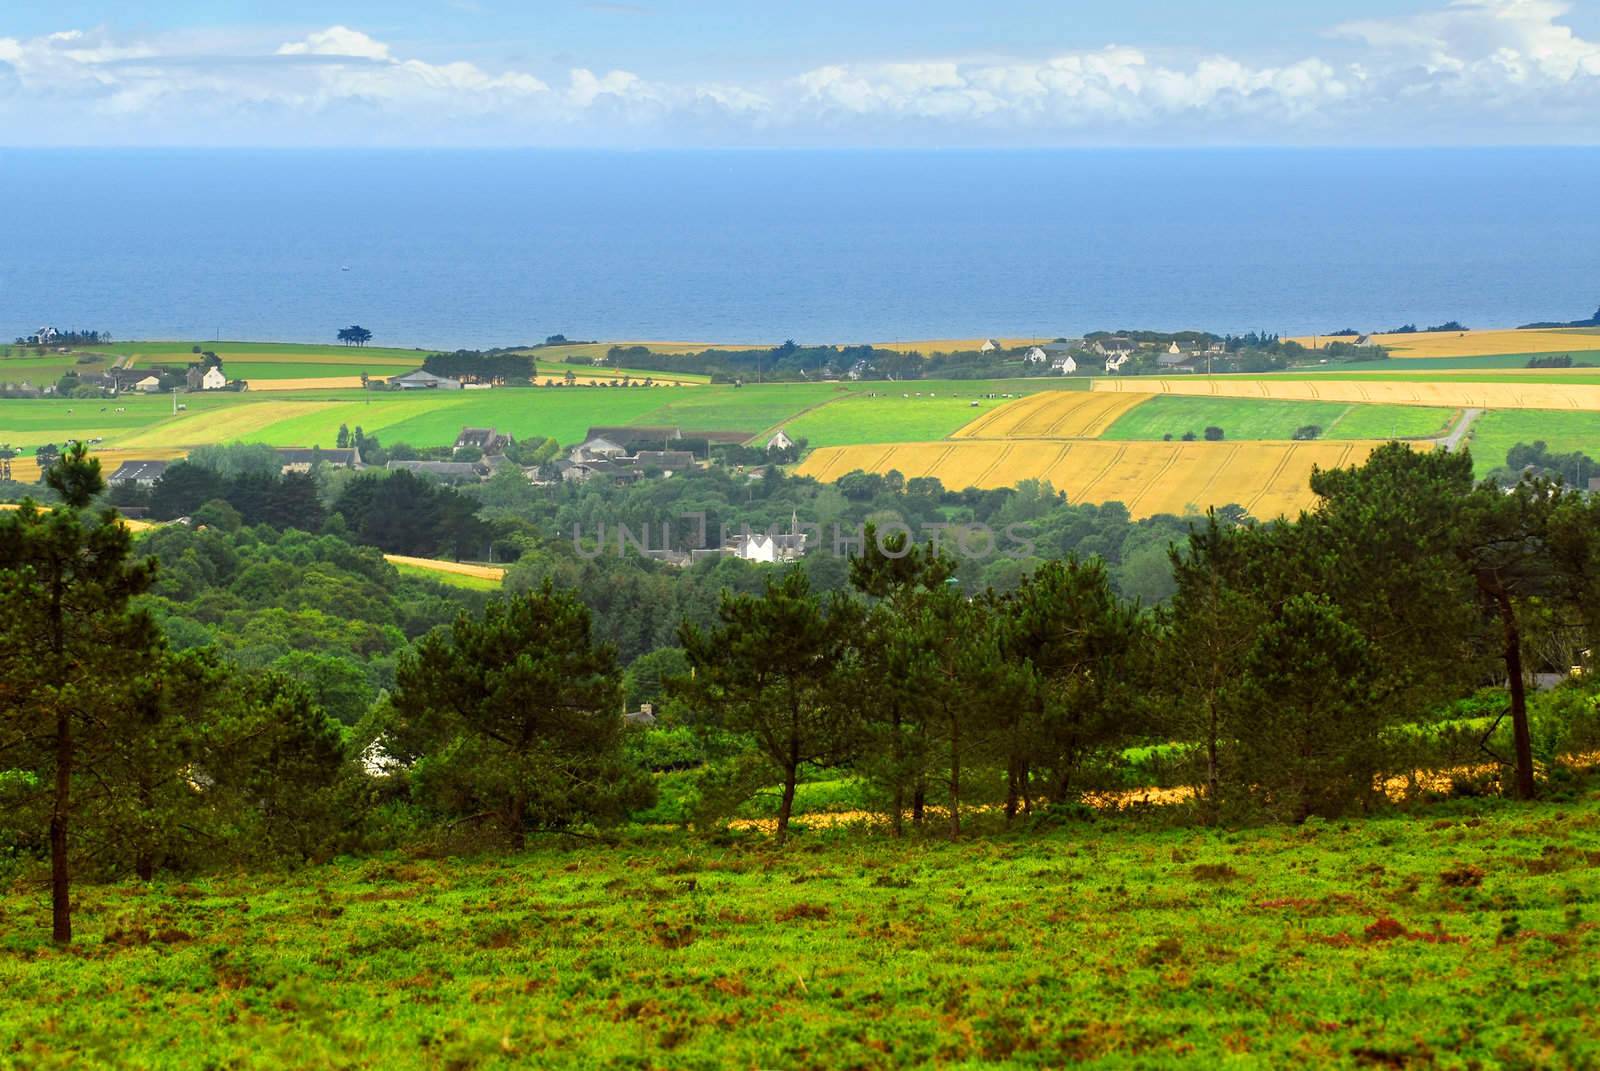 Agricultural landscape with scenic ocean view in rural Brittany, France